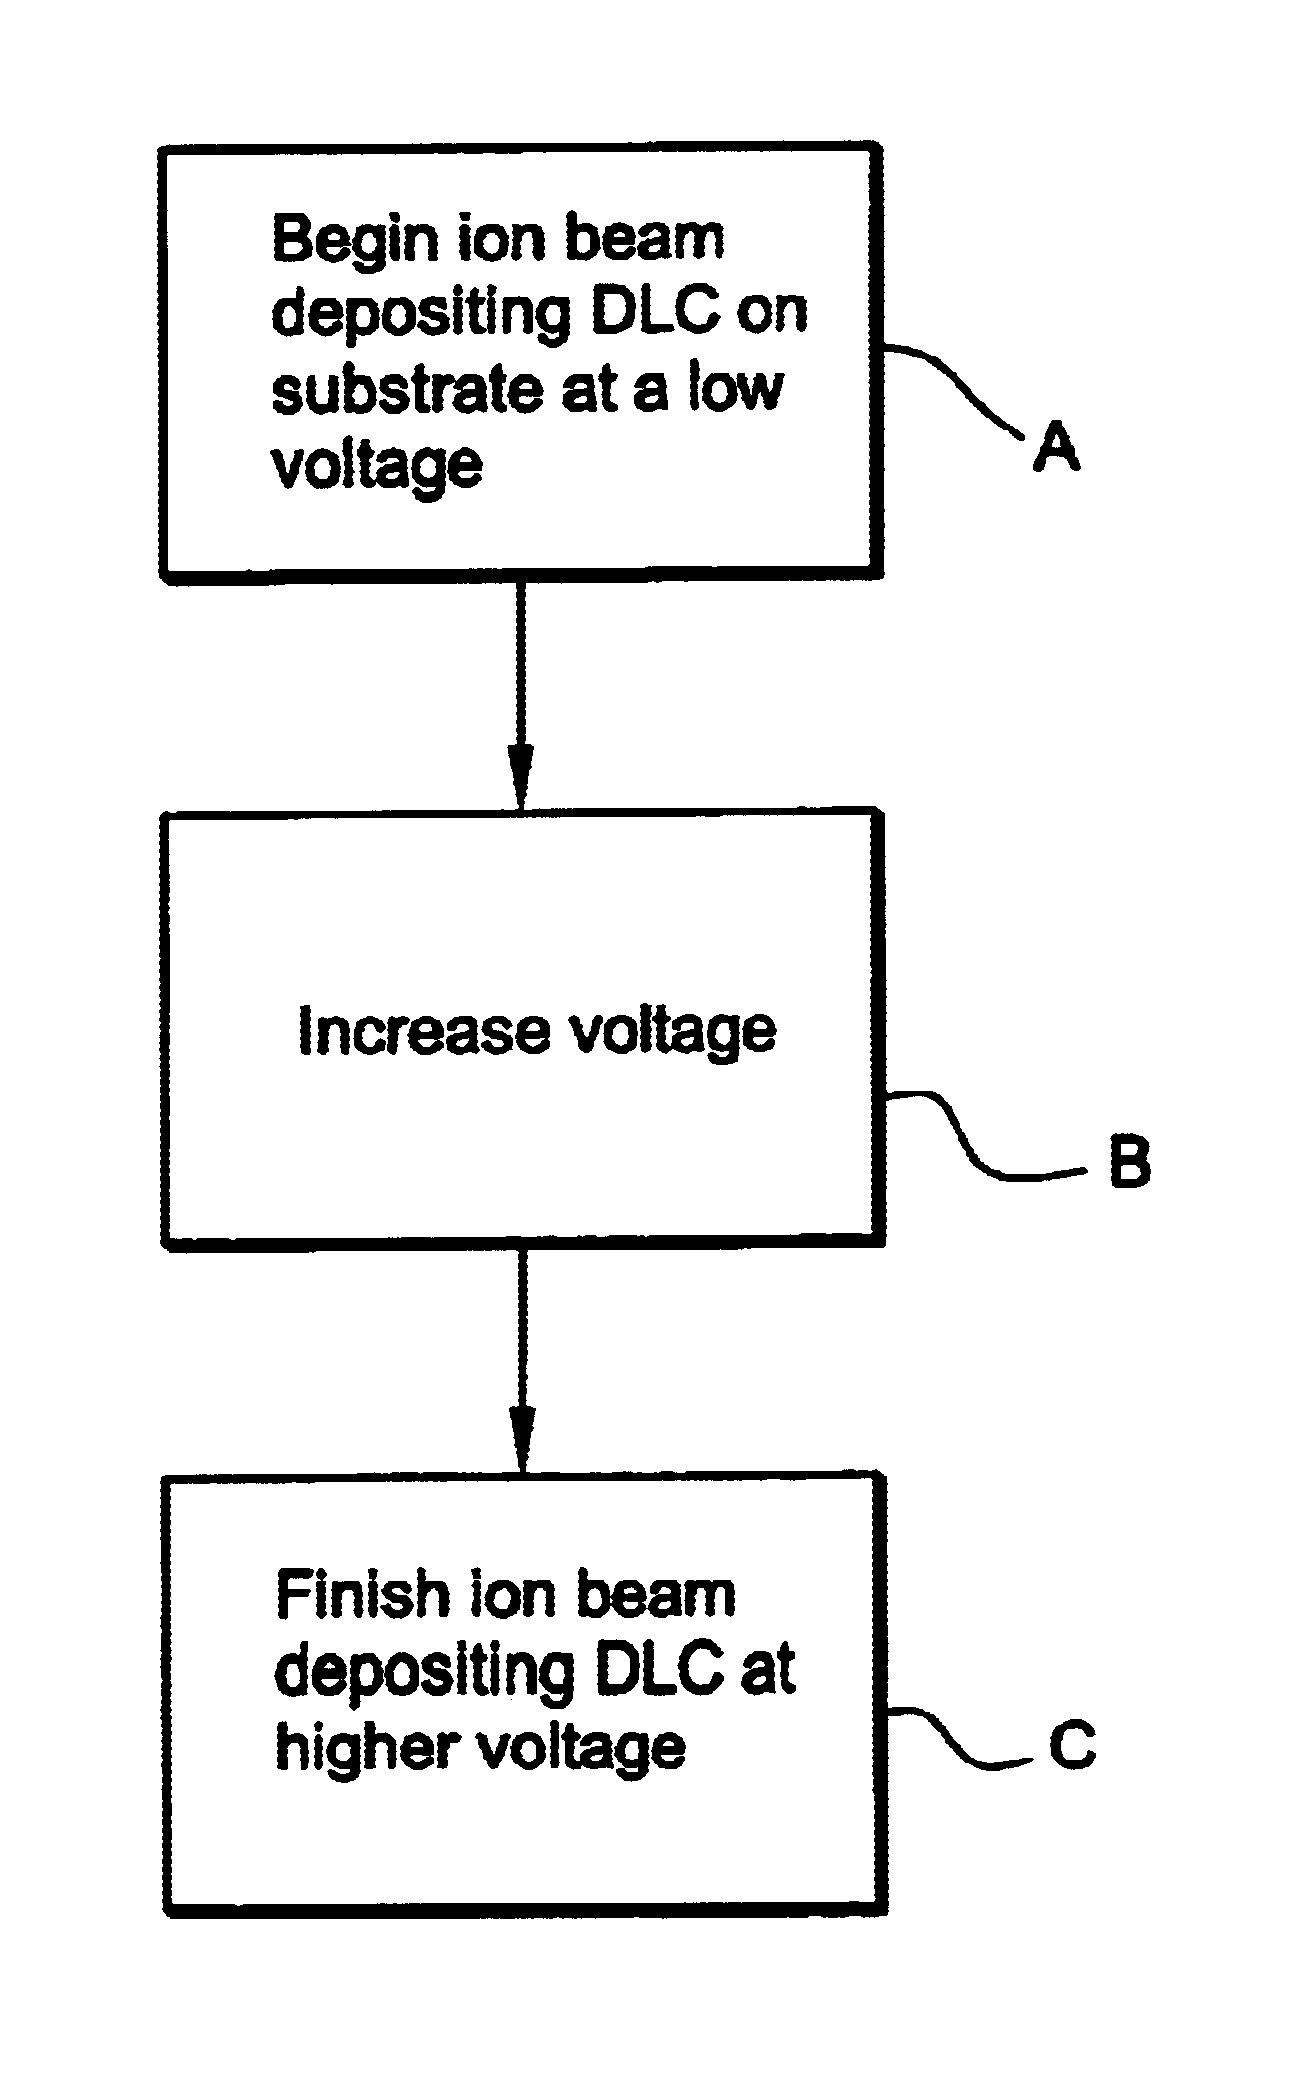 Method of depositing DLC on substrate